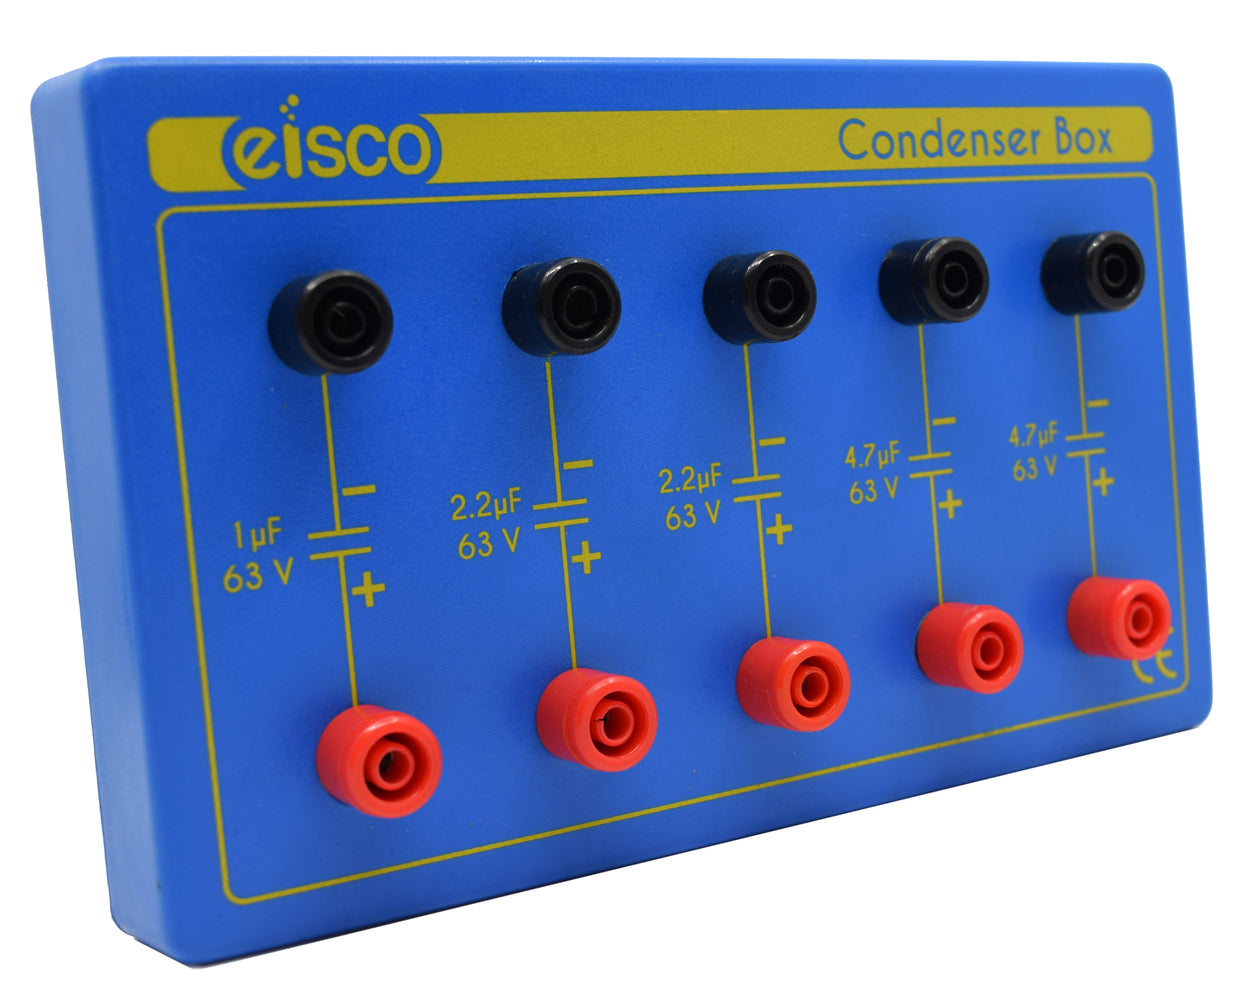 Condenser Box, Five Capacitators, 1µF to 4.7µF - Great for Electrical Experiments - Eisco Labs